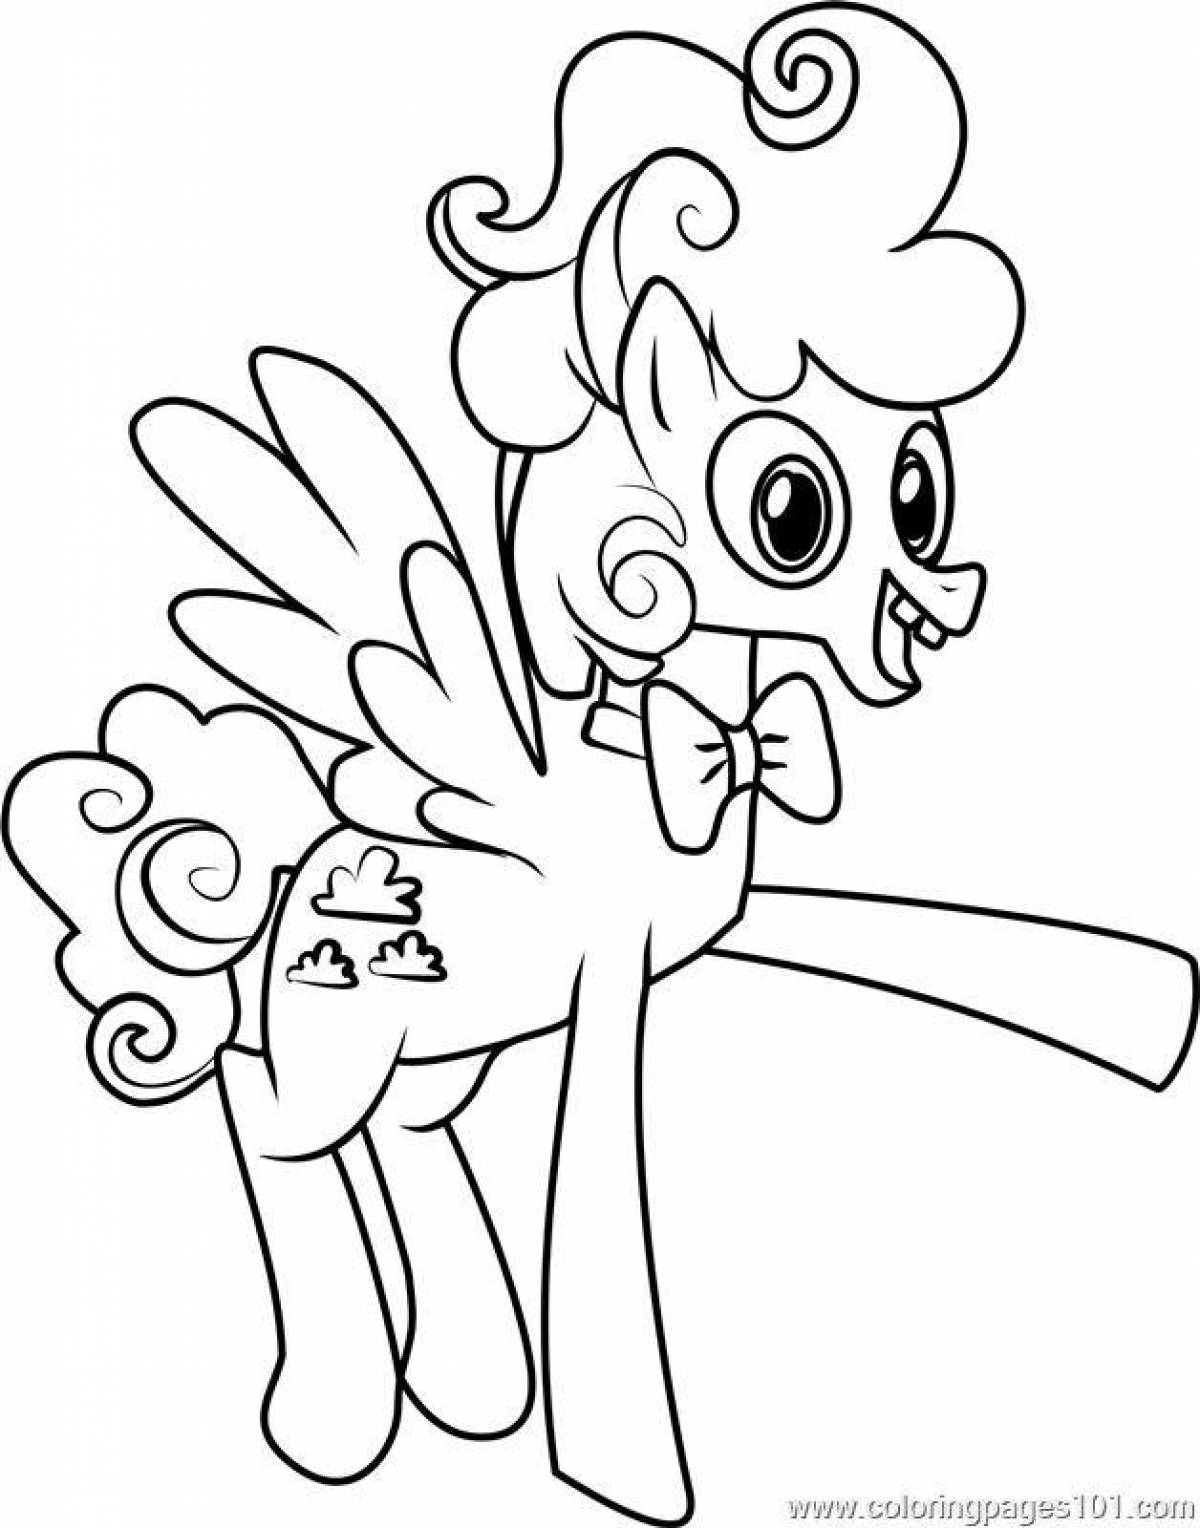 Coloring page playful pony sleigh